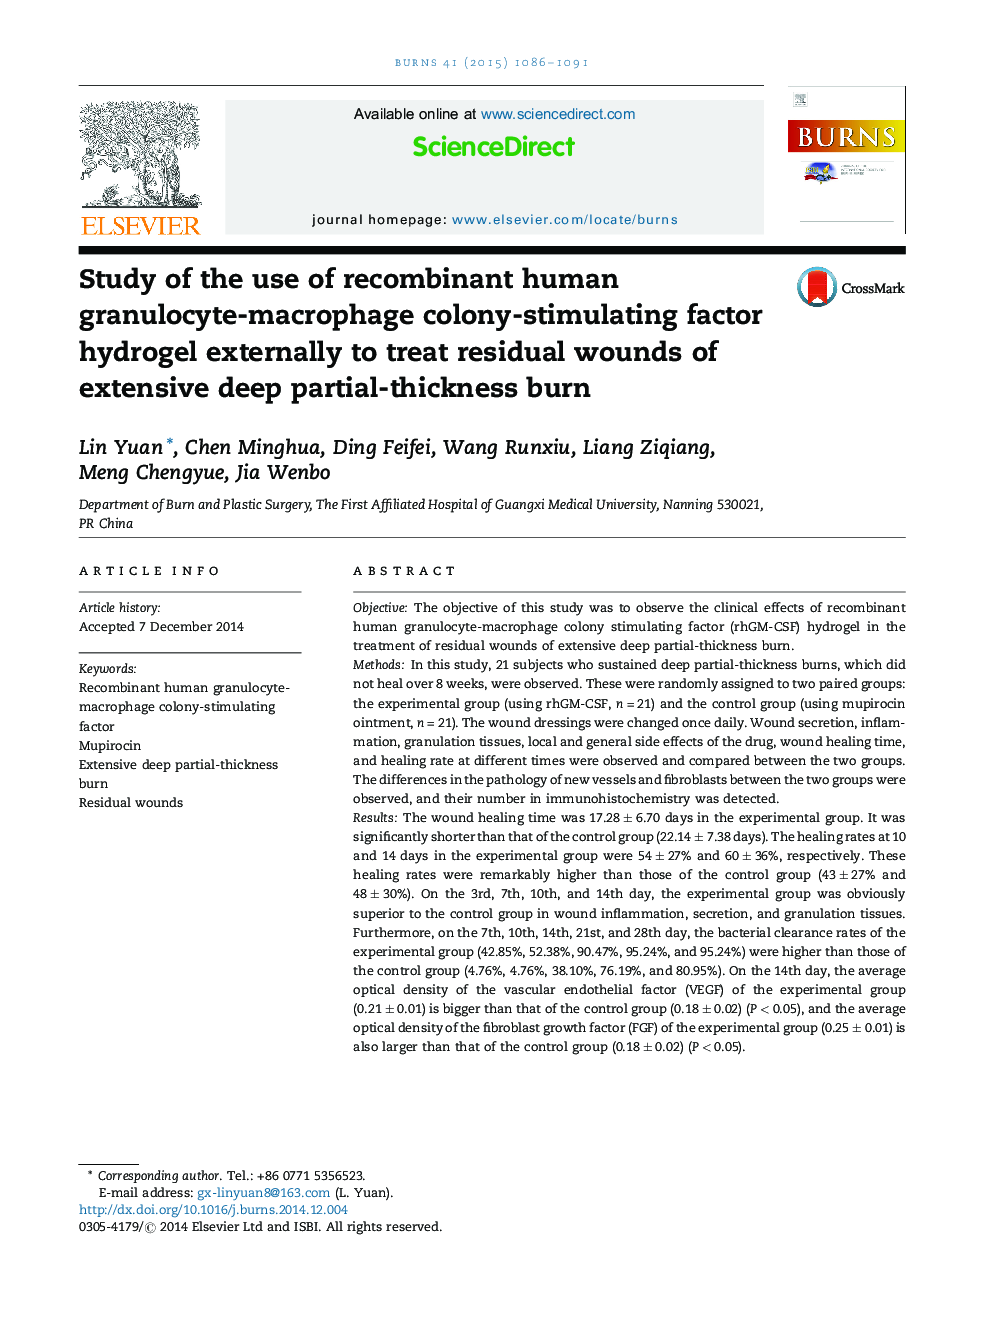 Study of the use of recombinant human granulocyte-macrophage colony-stimulating factor hydrogel externally to treat residual wounds of extensive deep partial-thickness burn